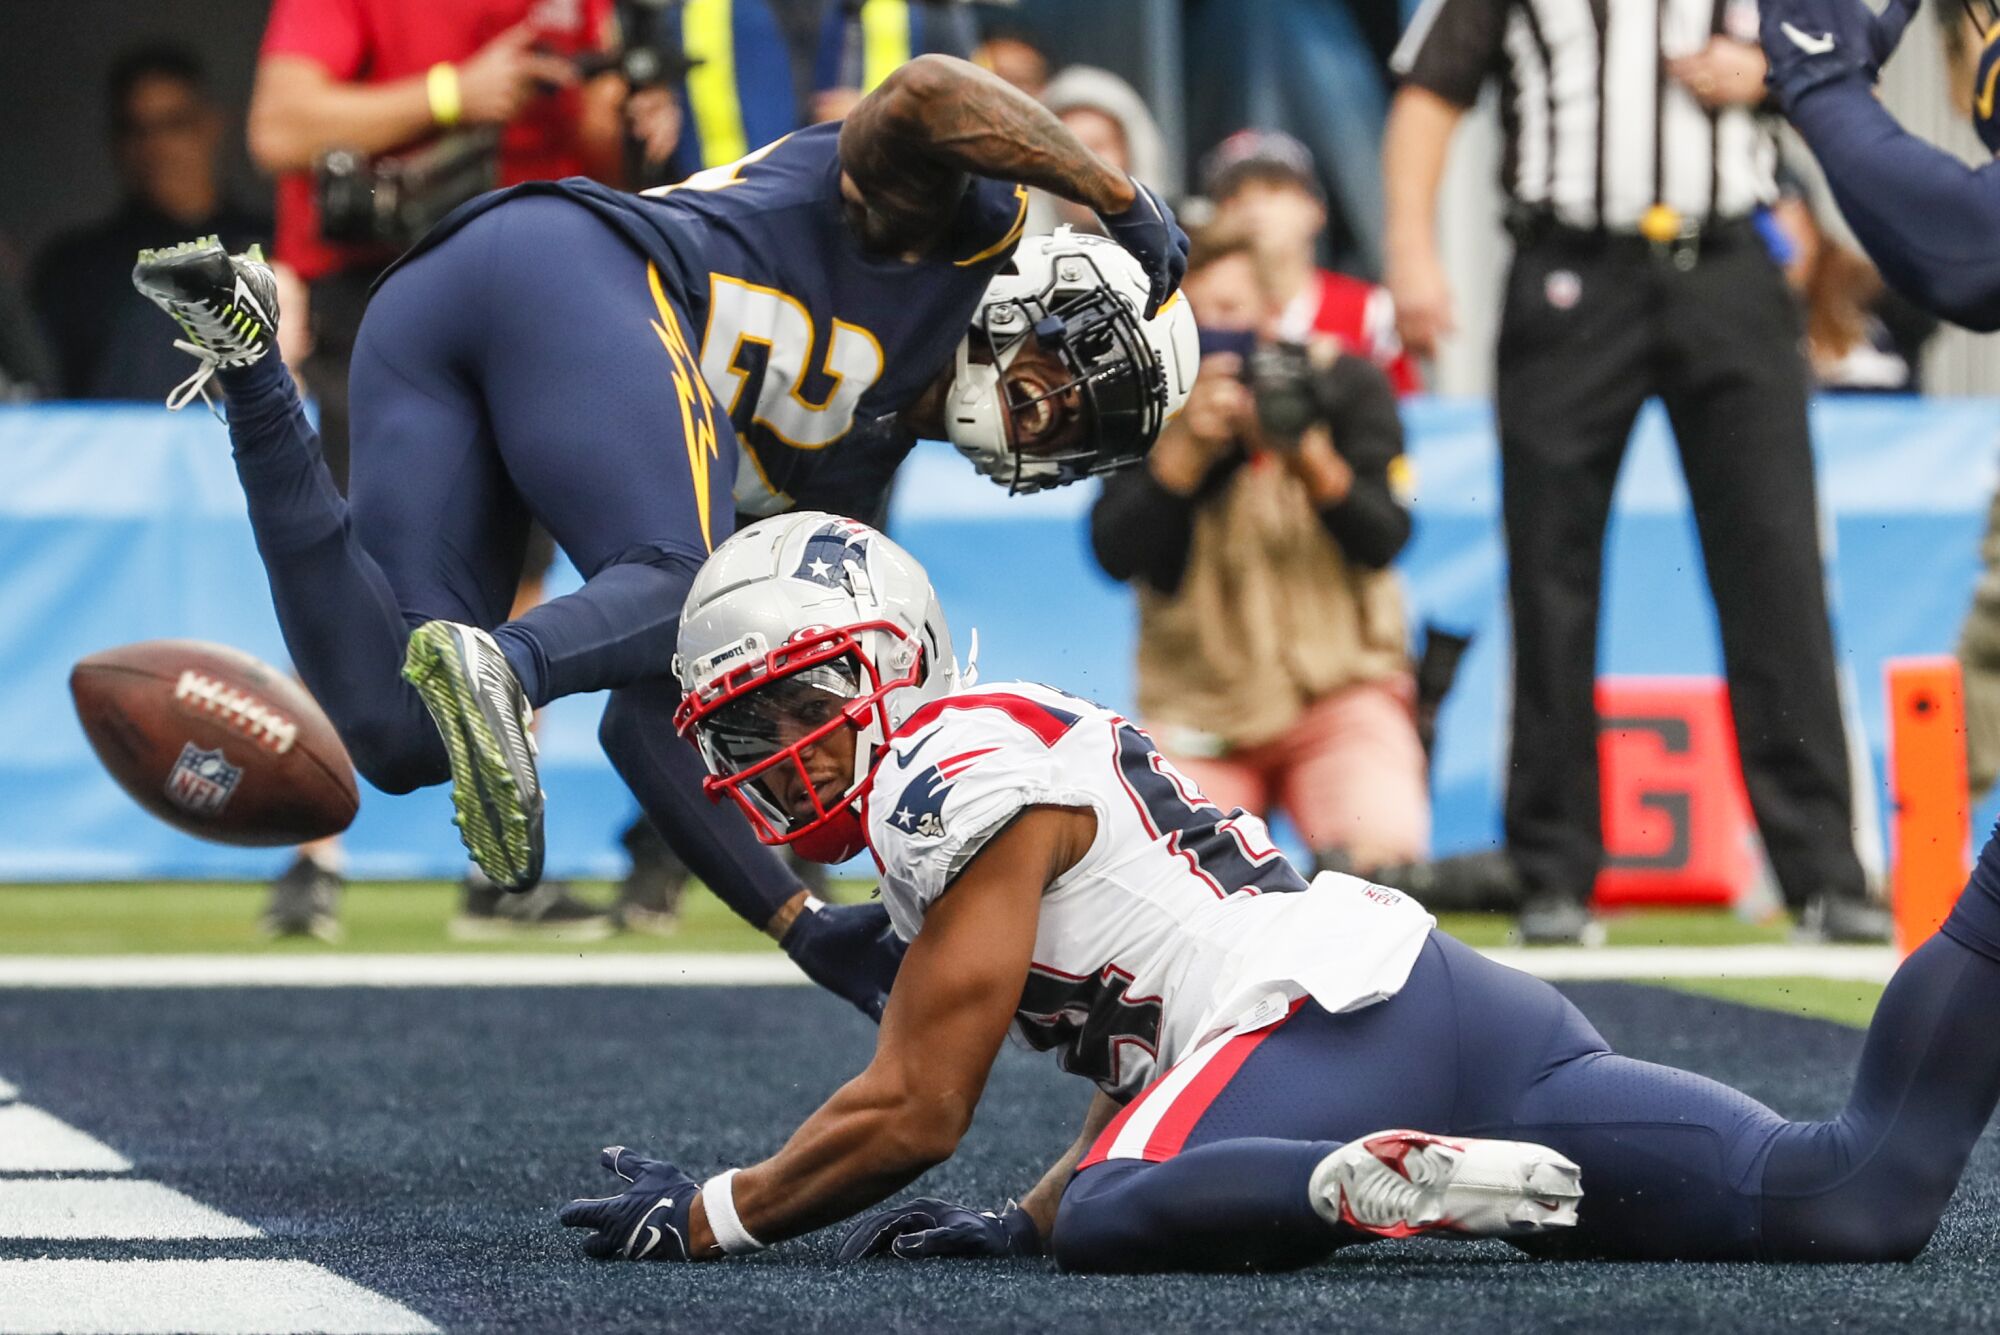 Chargers safety Nasir Adderley breaks up a pass intended for New England Patriots wide receiver Kendrick Bourne.